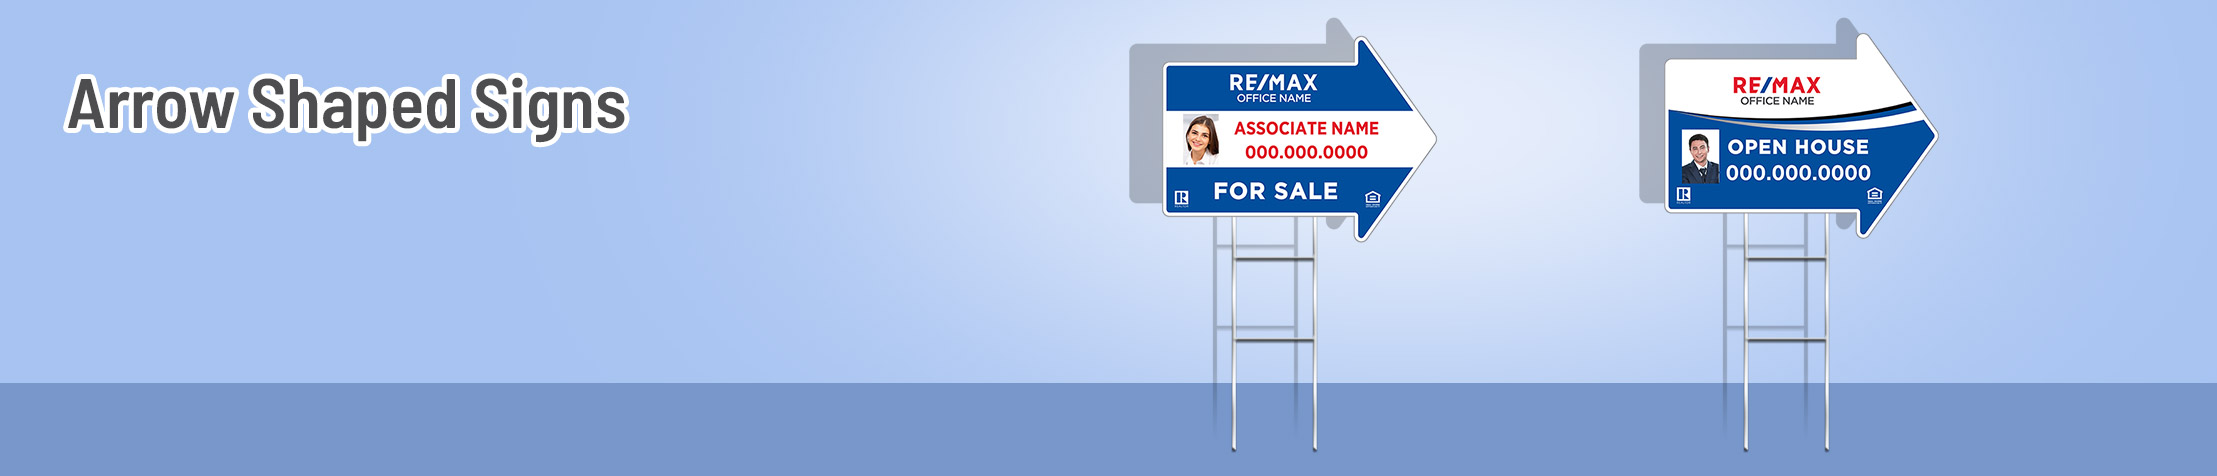 REMAX Real Estate Arrow Shaped Signs - REMAX directional real estate signs | Sparkprint.com